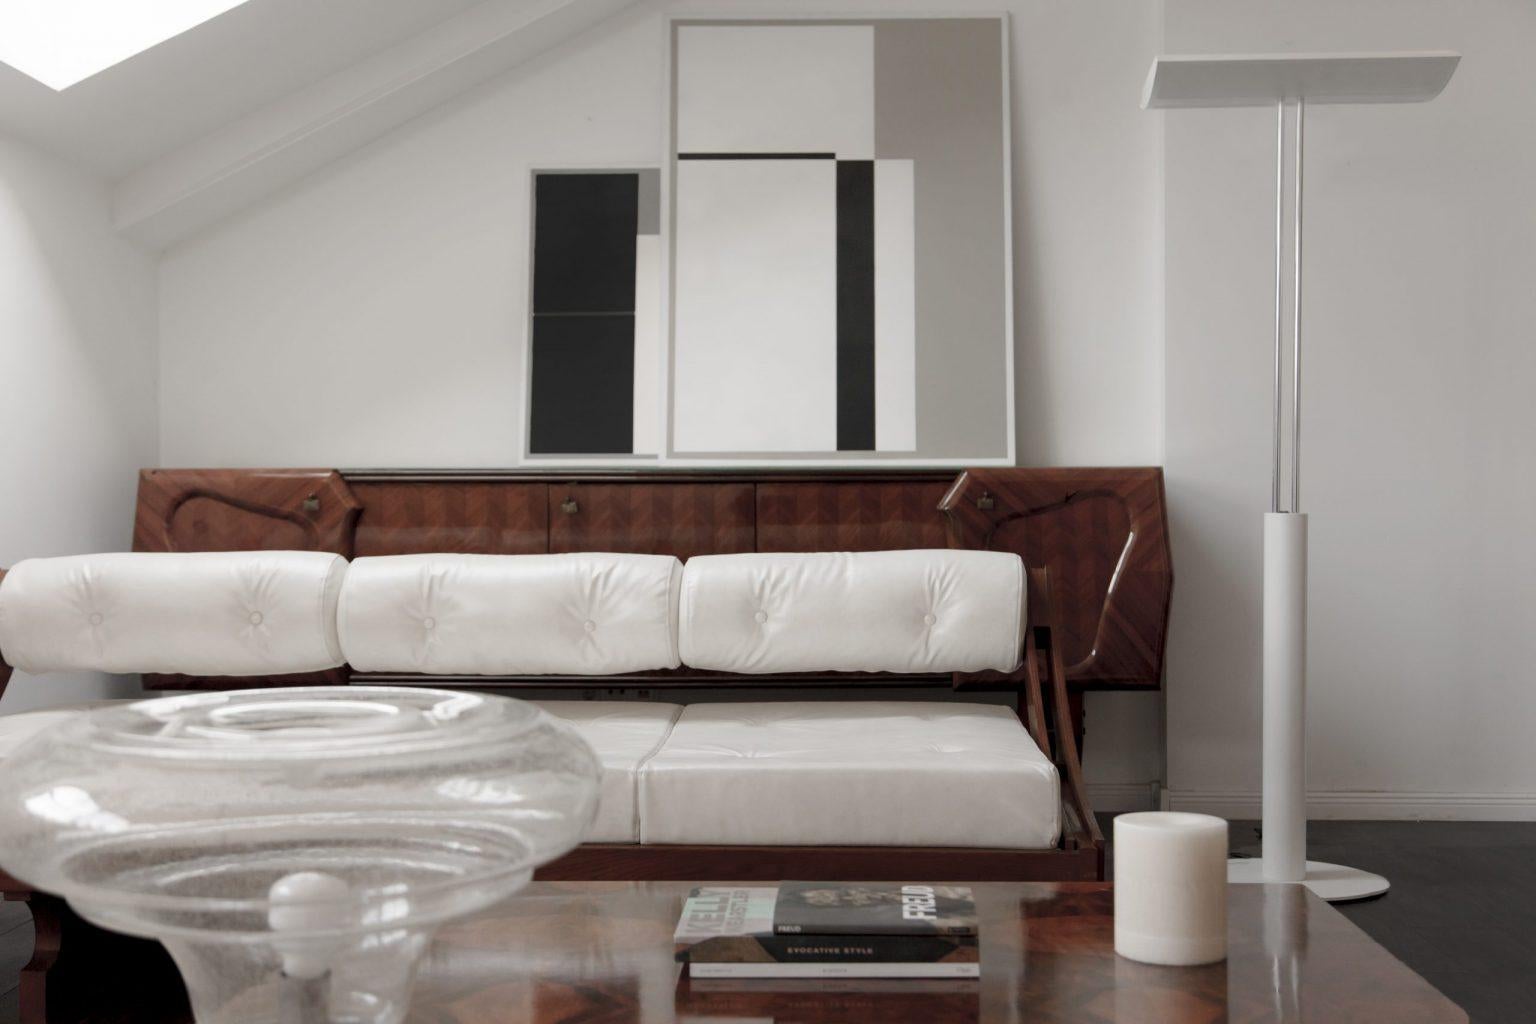 Gianni Songia is an Italian furniture designer and manufacturer known for producing high-quality modern and contemporary furniture pieces.

This minimalist daybed has been reupholstered in new luxurious off-white leather, giving it a clean and